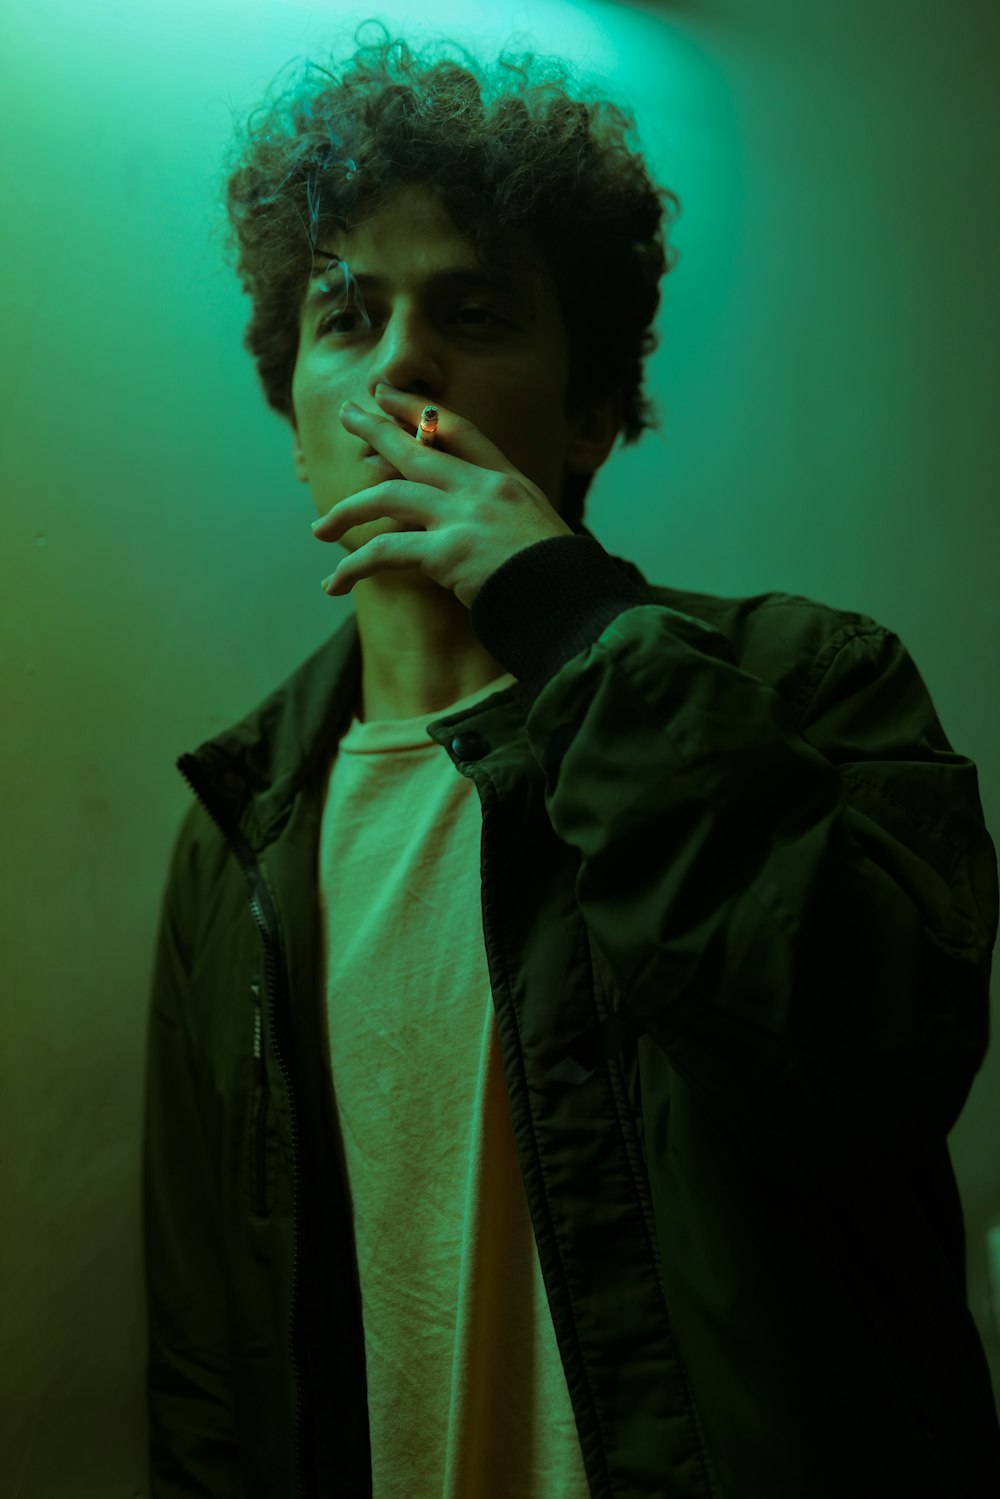 a young man smoking a cigarette in a dark room